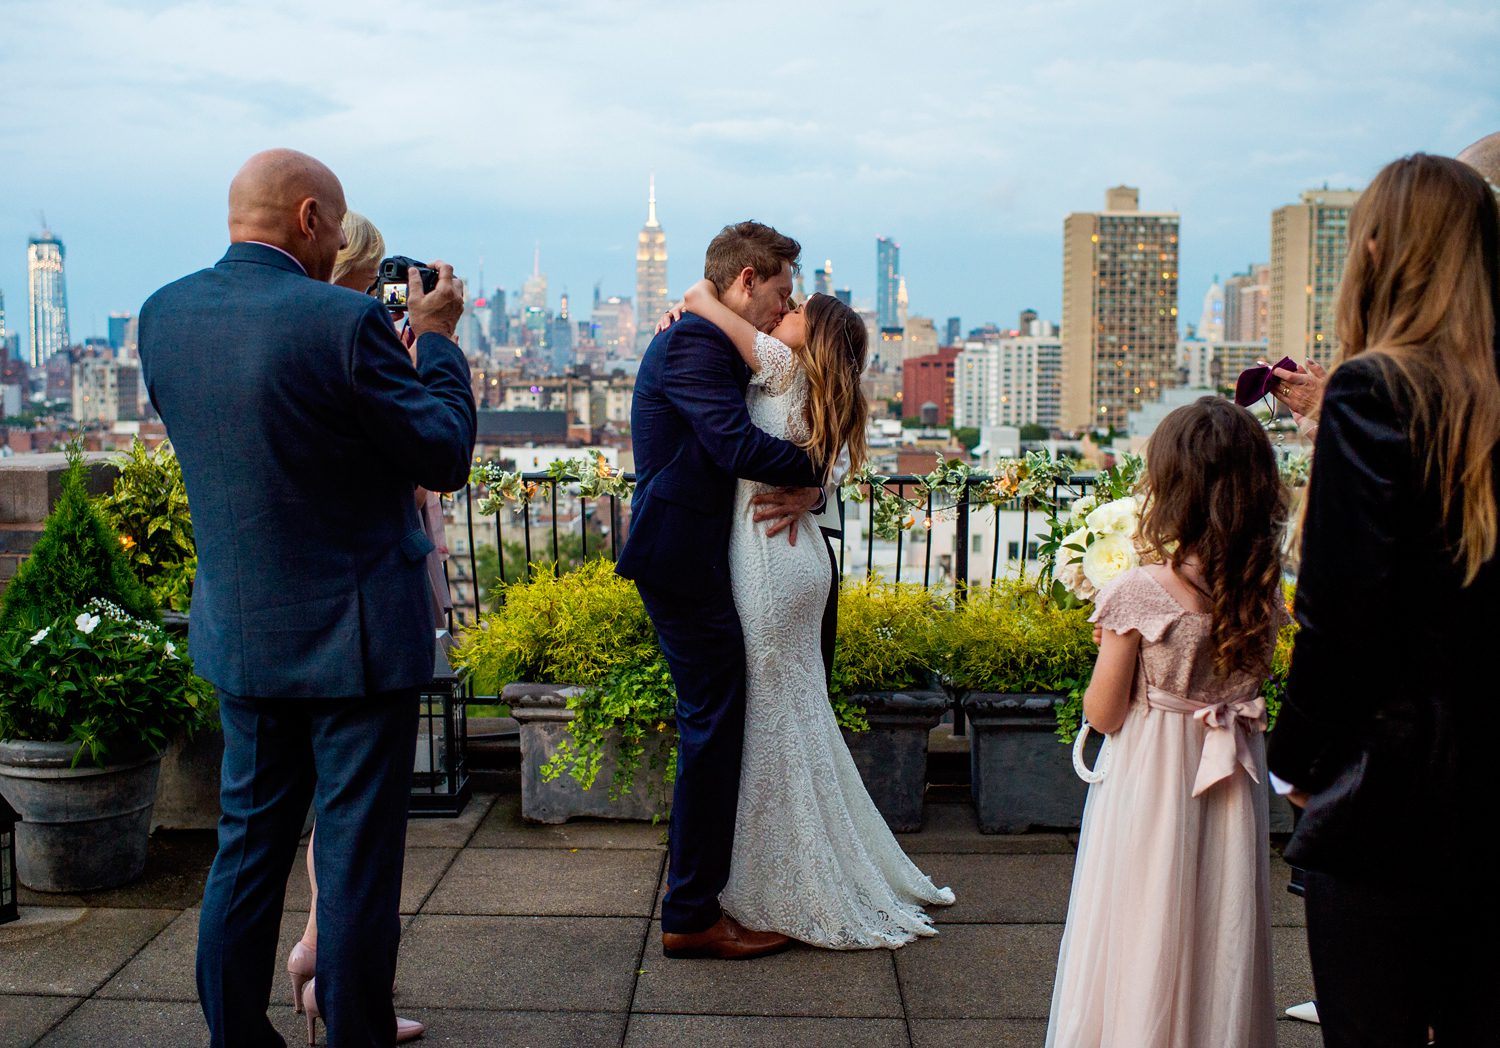 Rooftop wedding in NYC